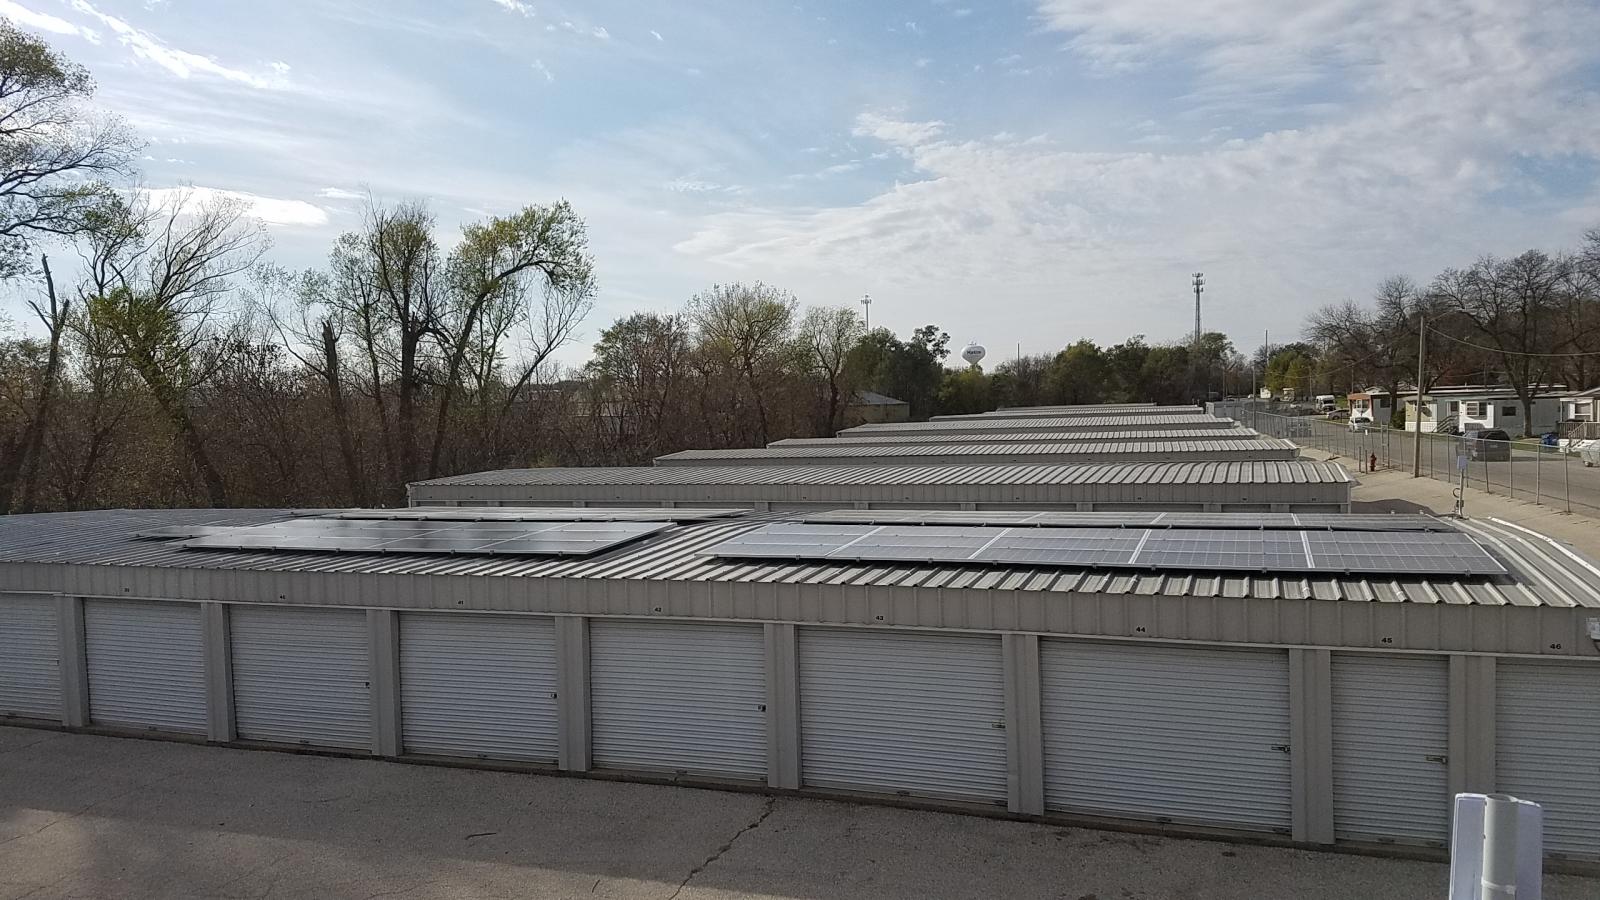 Units with solar panels on top in Cedar Rapids, IA